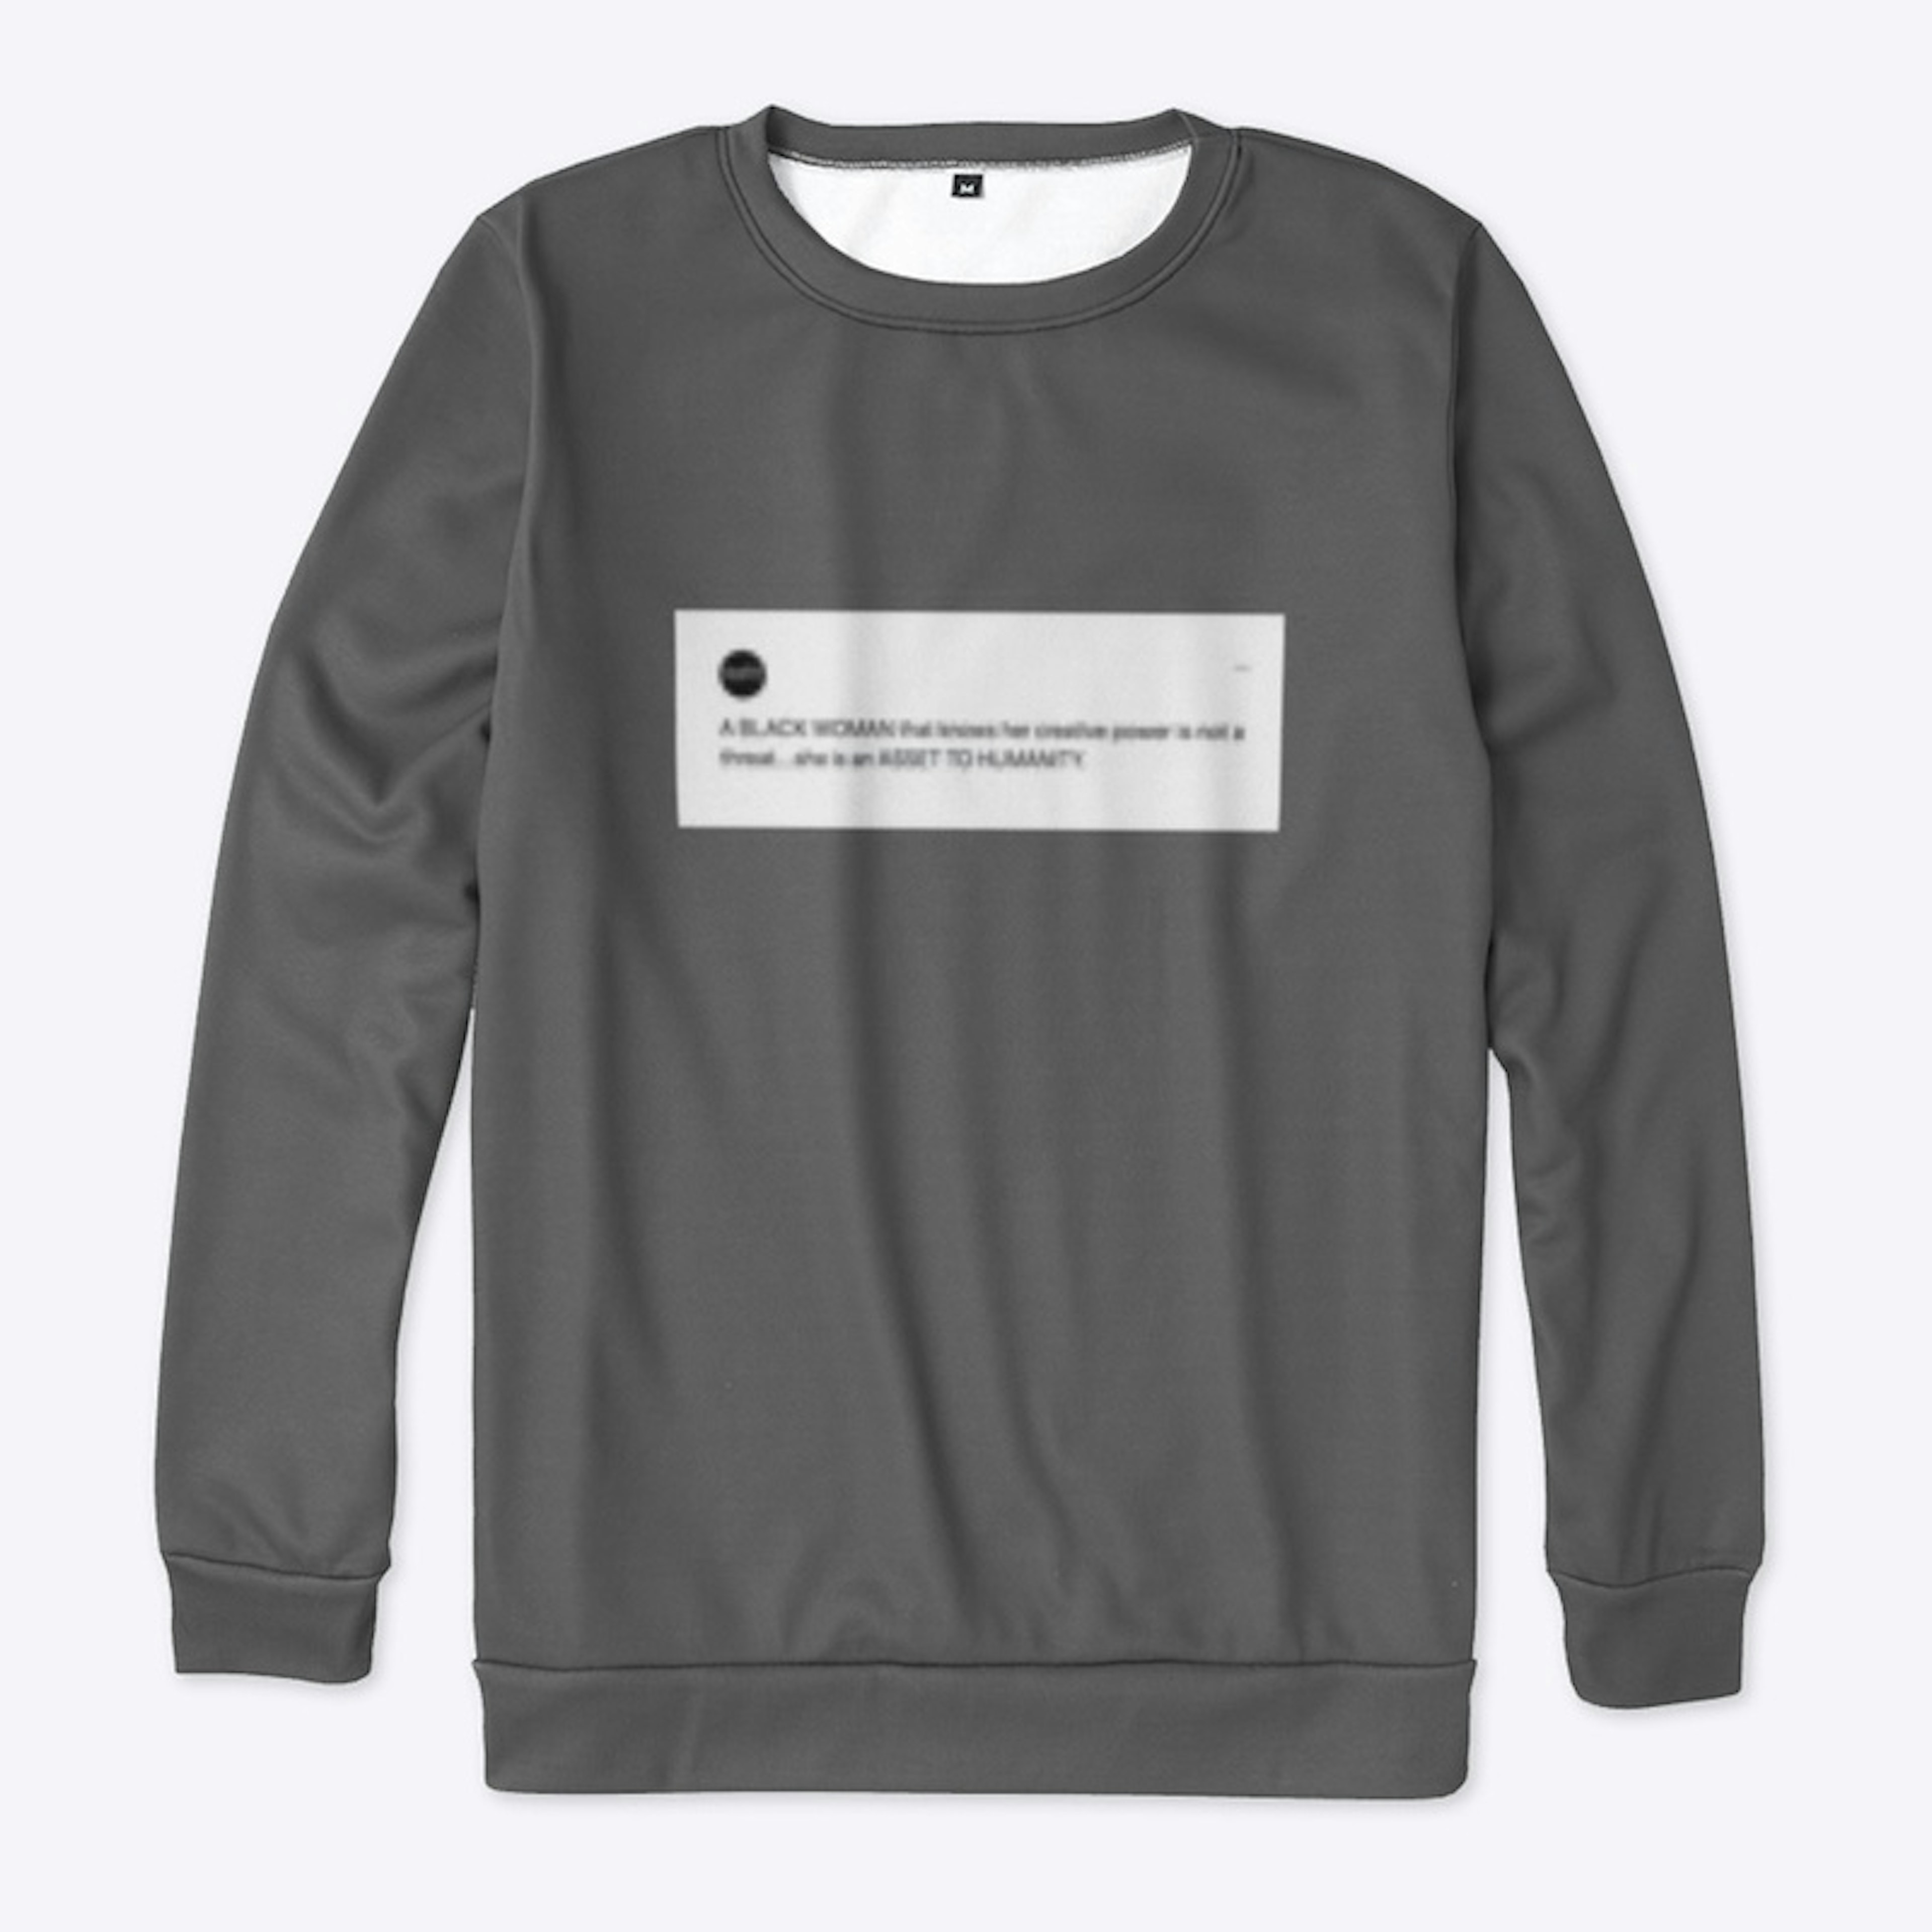 ASSET TO HUMANITY MERCH!